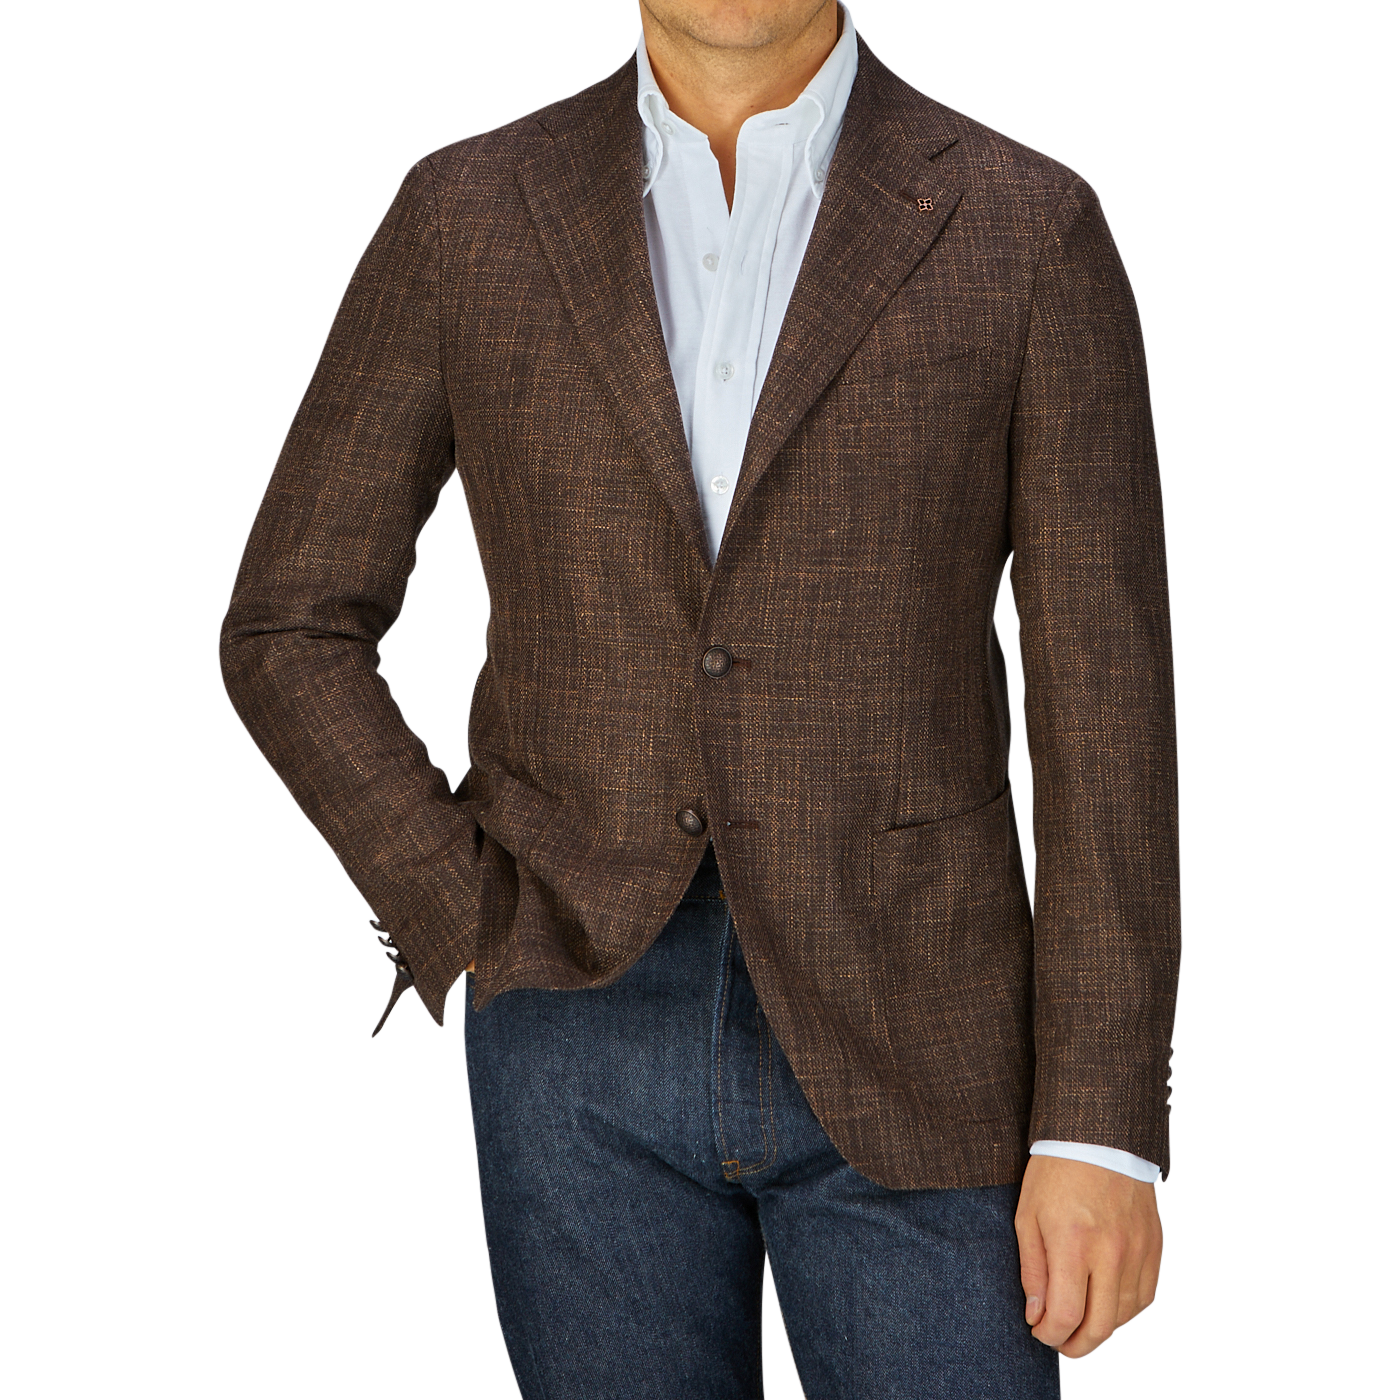 Man in a Tagliatore Dark Brown Melange Wool Linen Silk Blazer and blue jeans with a white shirt, hands in pockets, cropped at the neck.